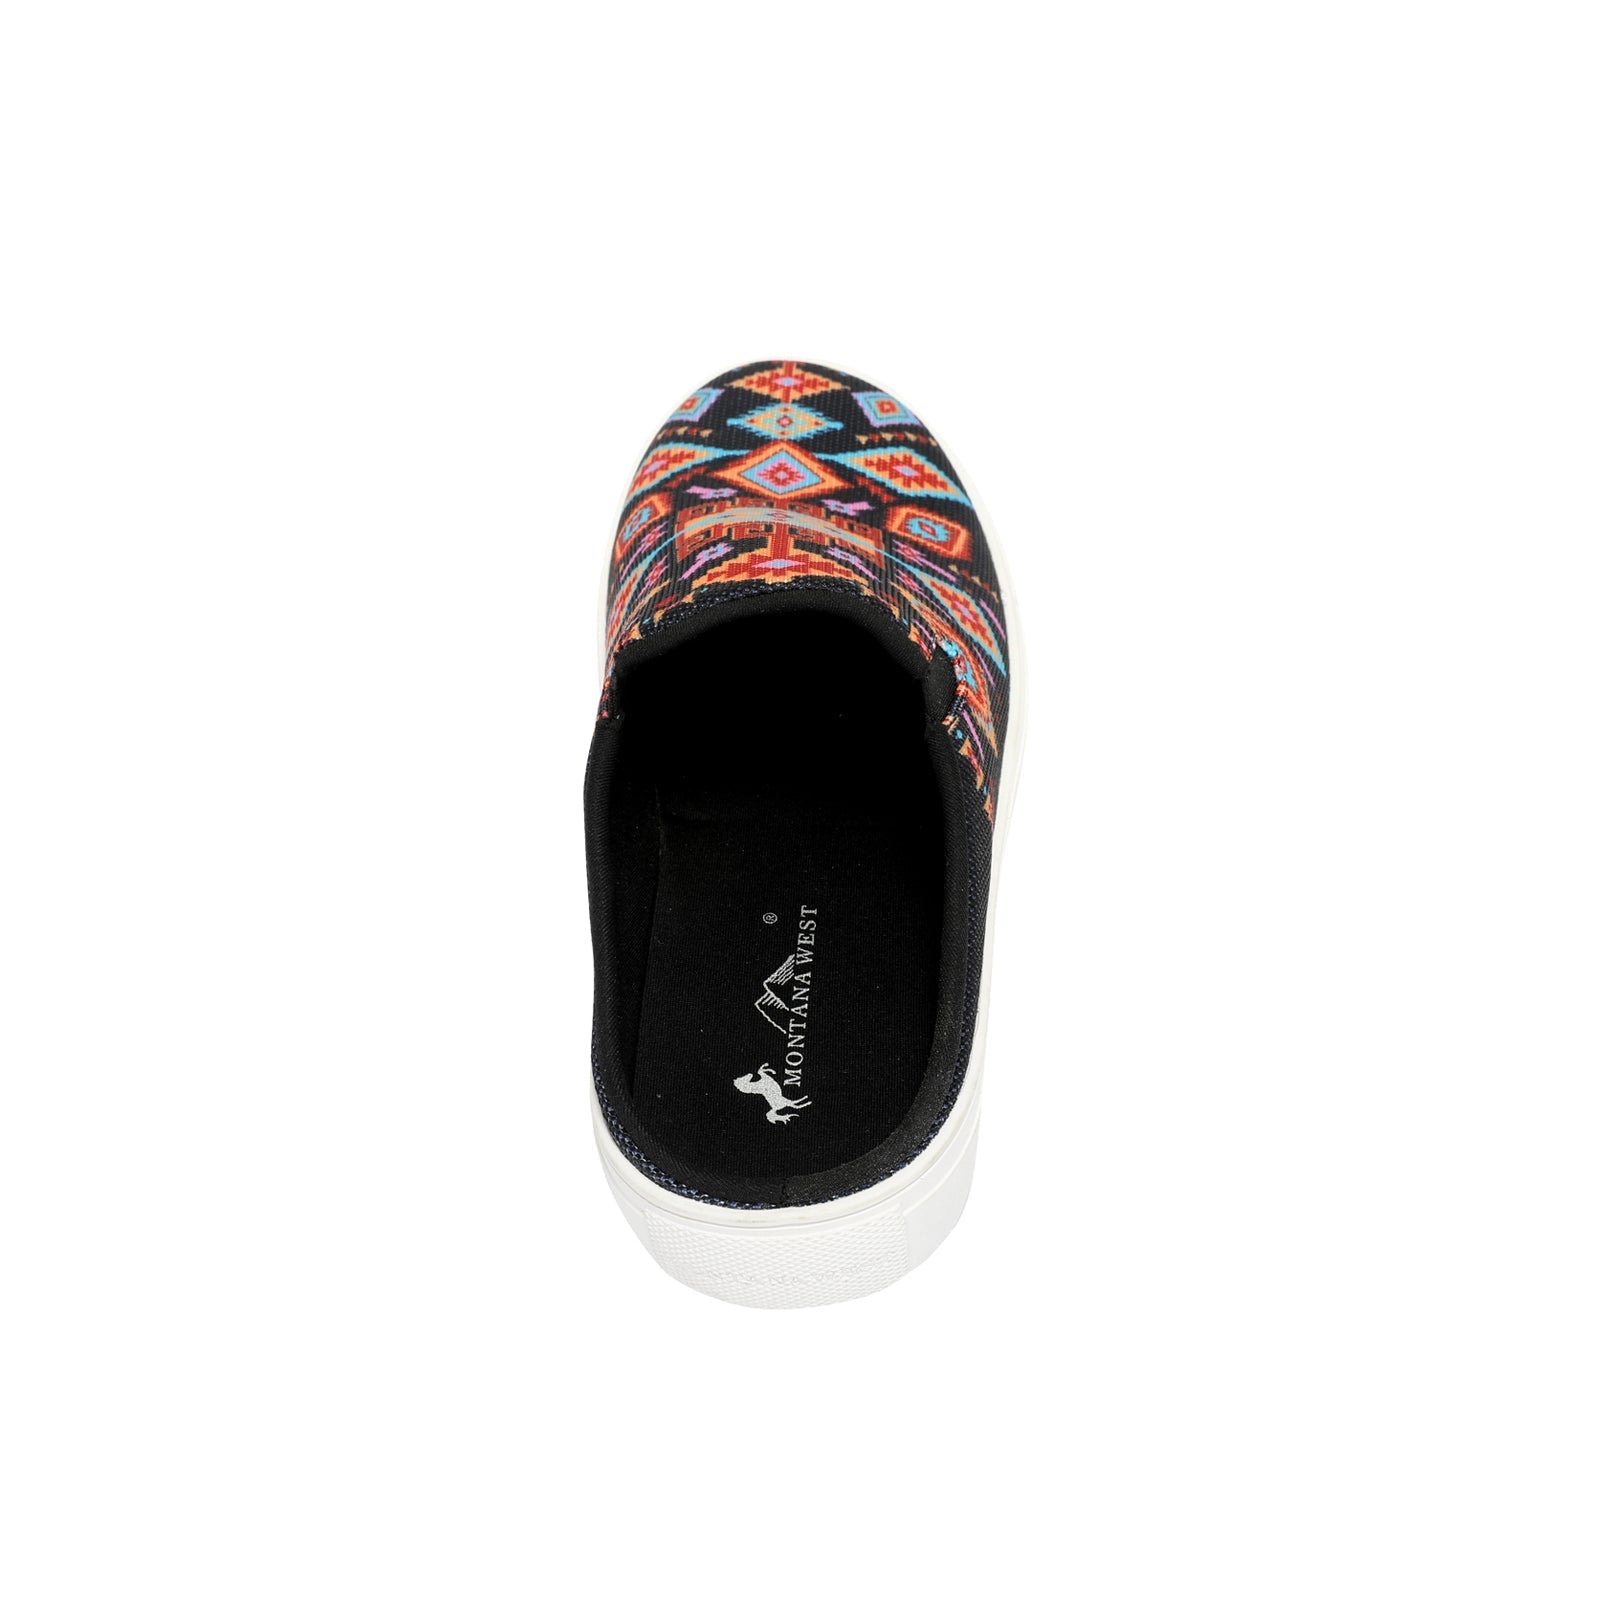 Montana West Western Aztec Print Collection Sneaker Slides